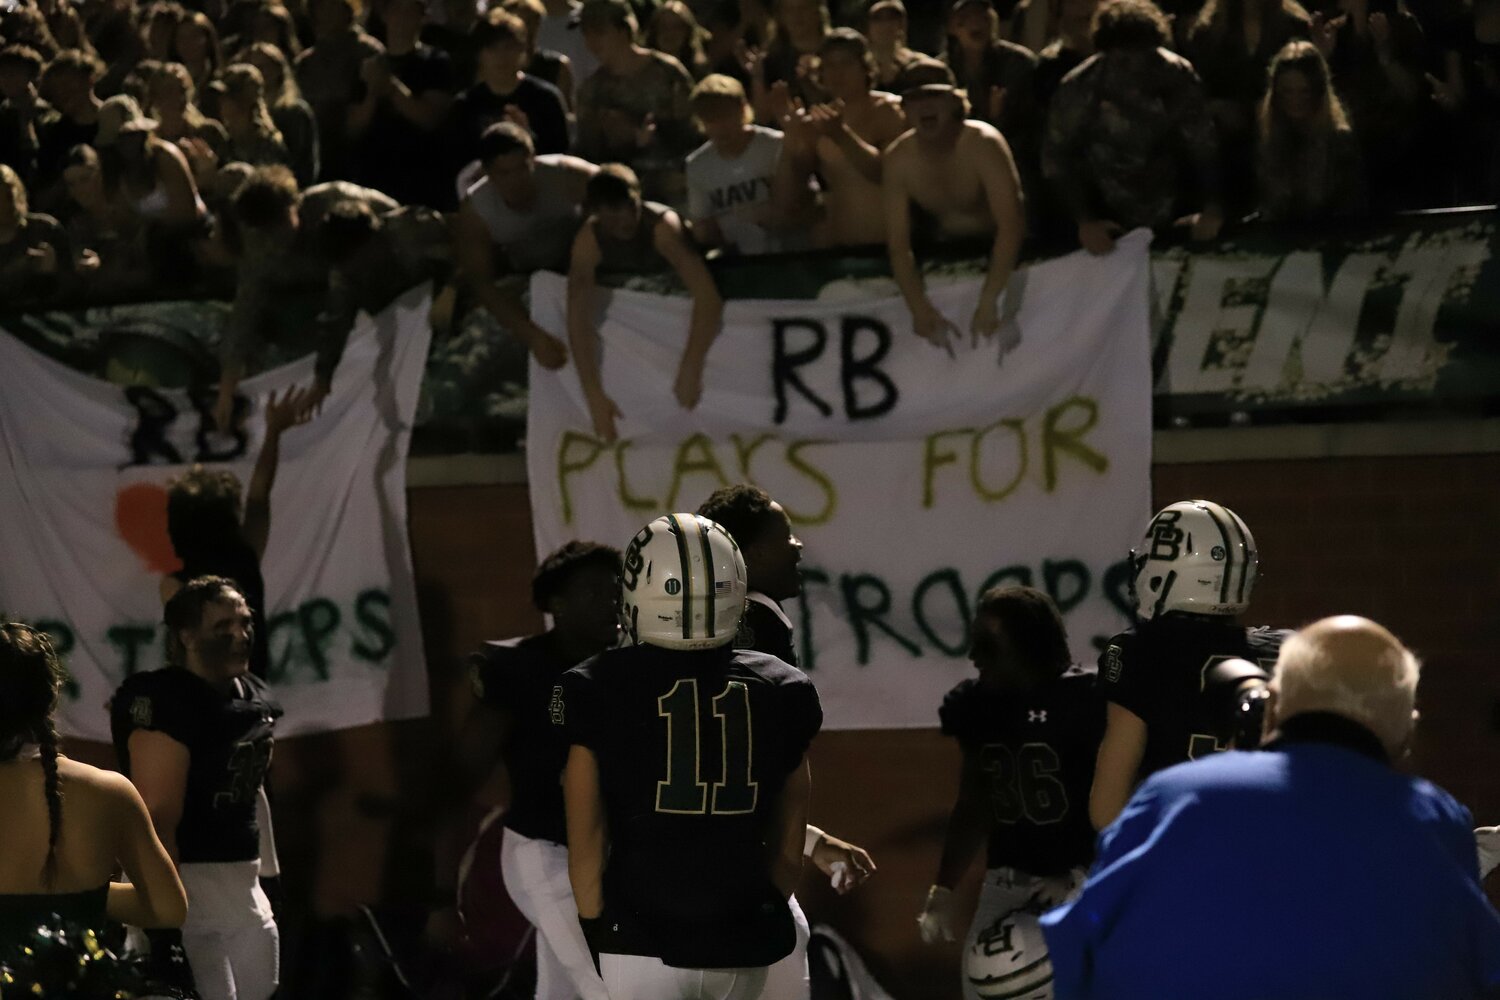 The River Bluff players celebrate with the student section after they clinched their thrilling 29-28 win over Dorman.